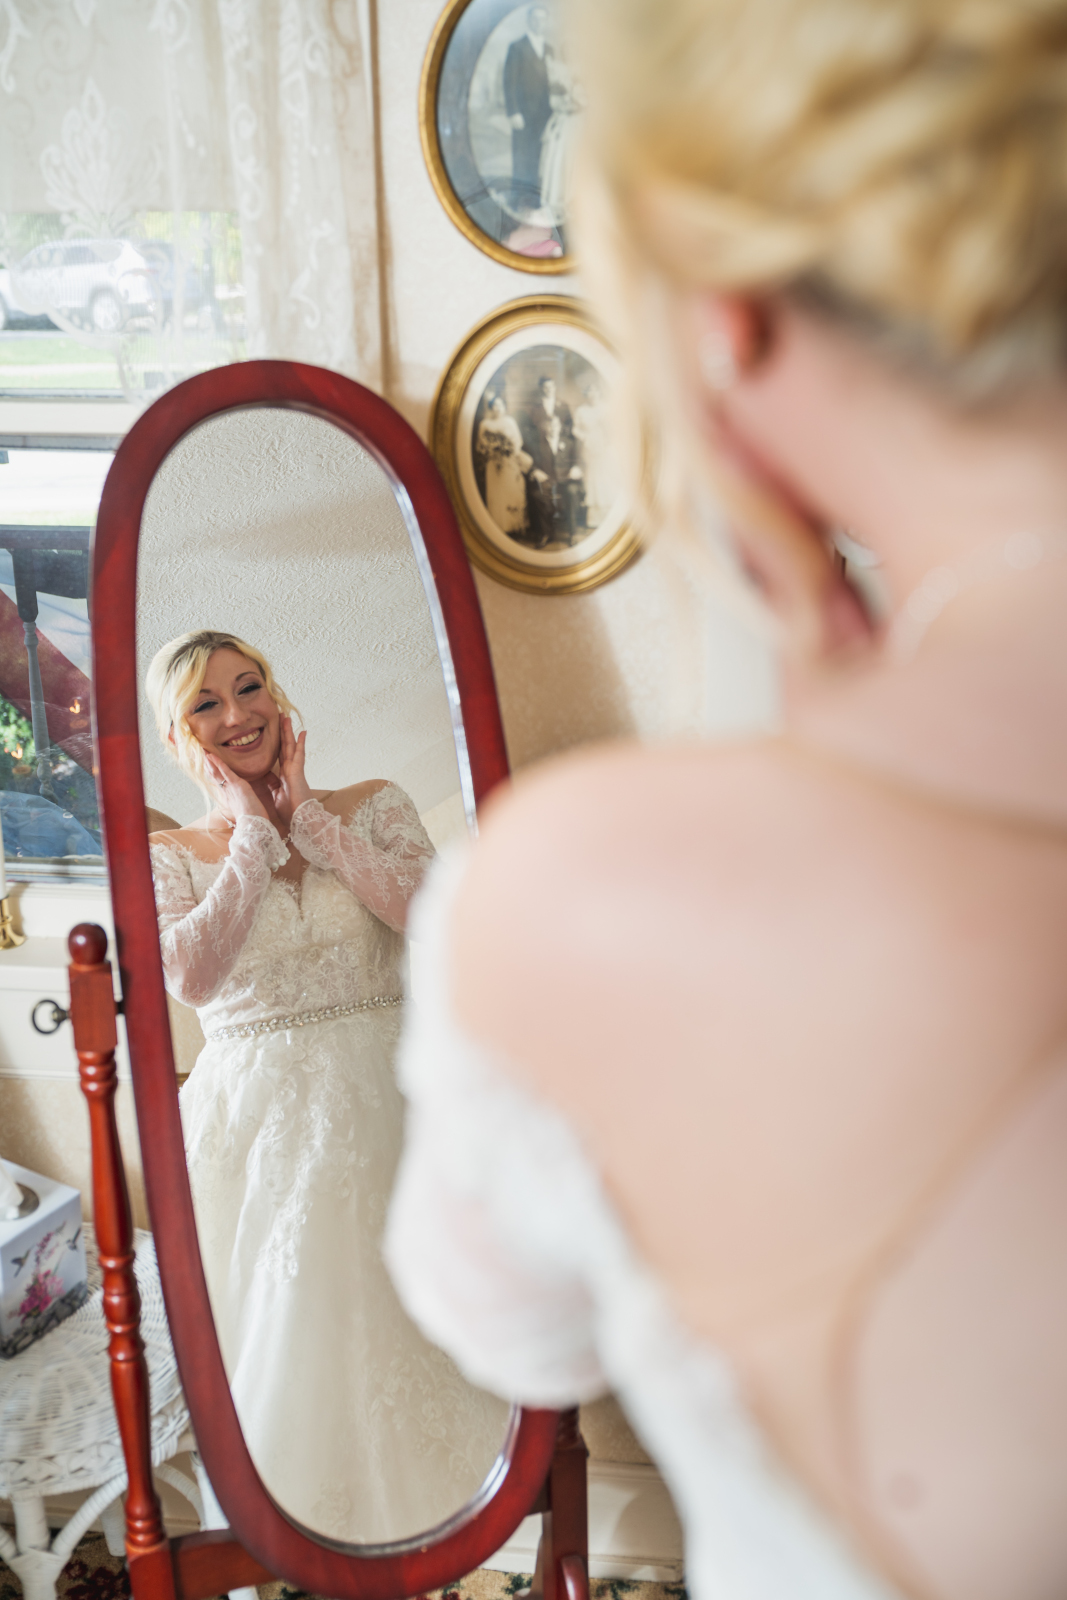 Bride smiling in mirror, getting ready, wedding preparation, hair and makeup, wedding dress, fall wedding, cute outdoor wedding ceremony at Grand Pacific Wedding Gardens